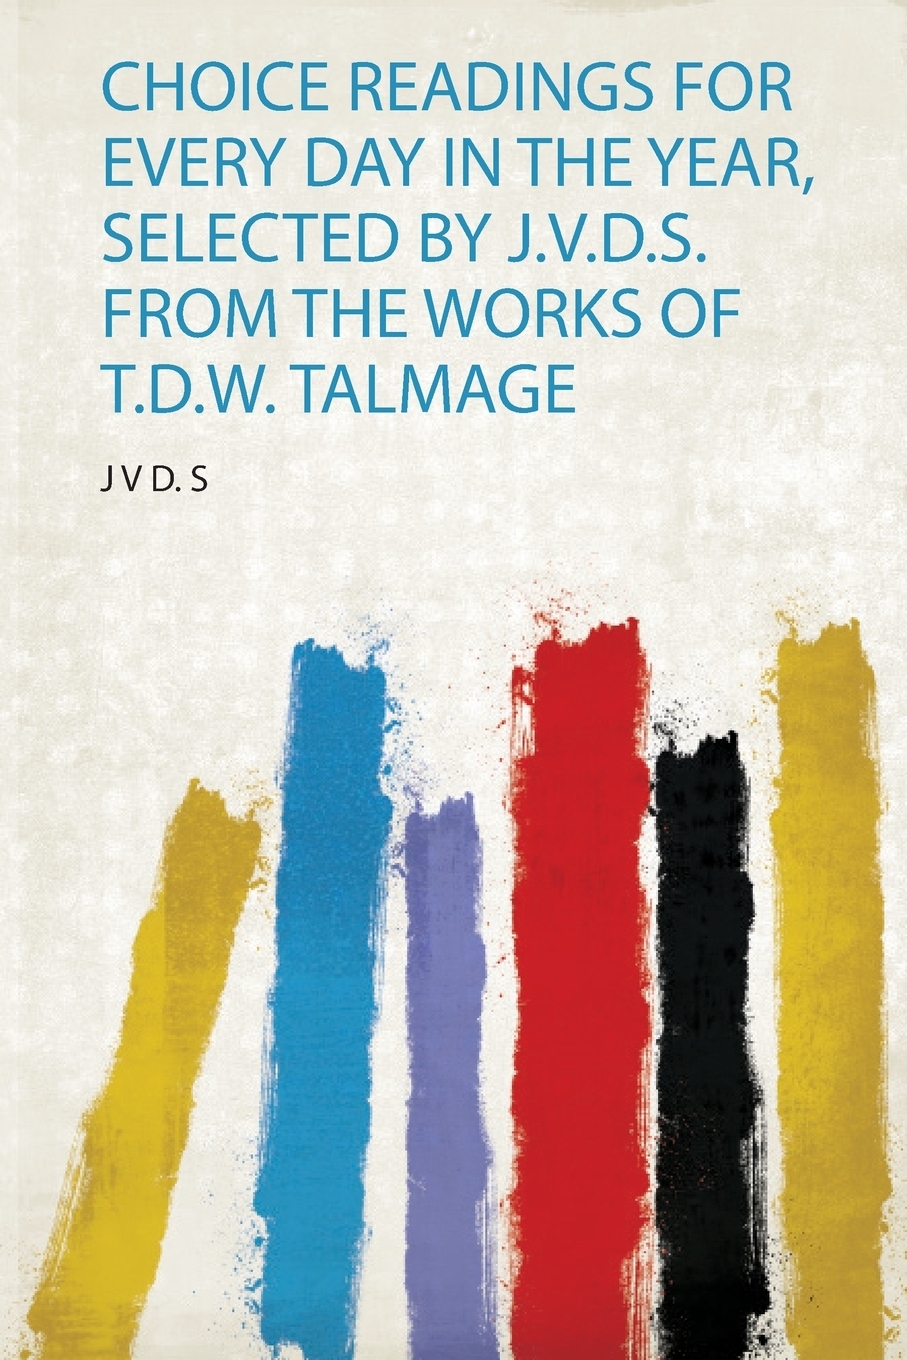 Choice Readings for Every Day in the Year, Selected by J.V.D.S. from the Works of T.D.W. Talmage